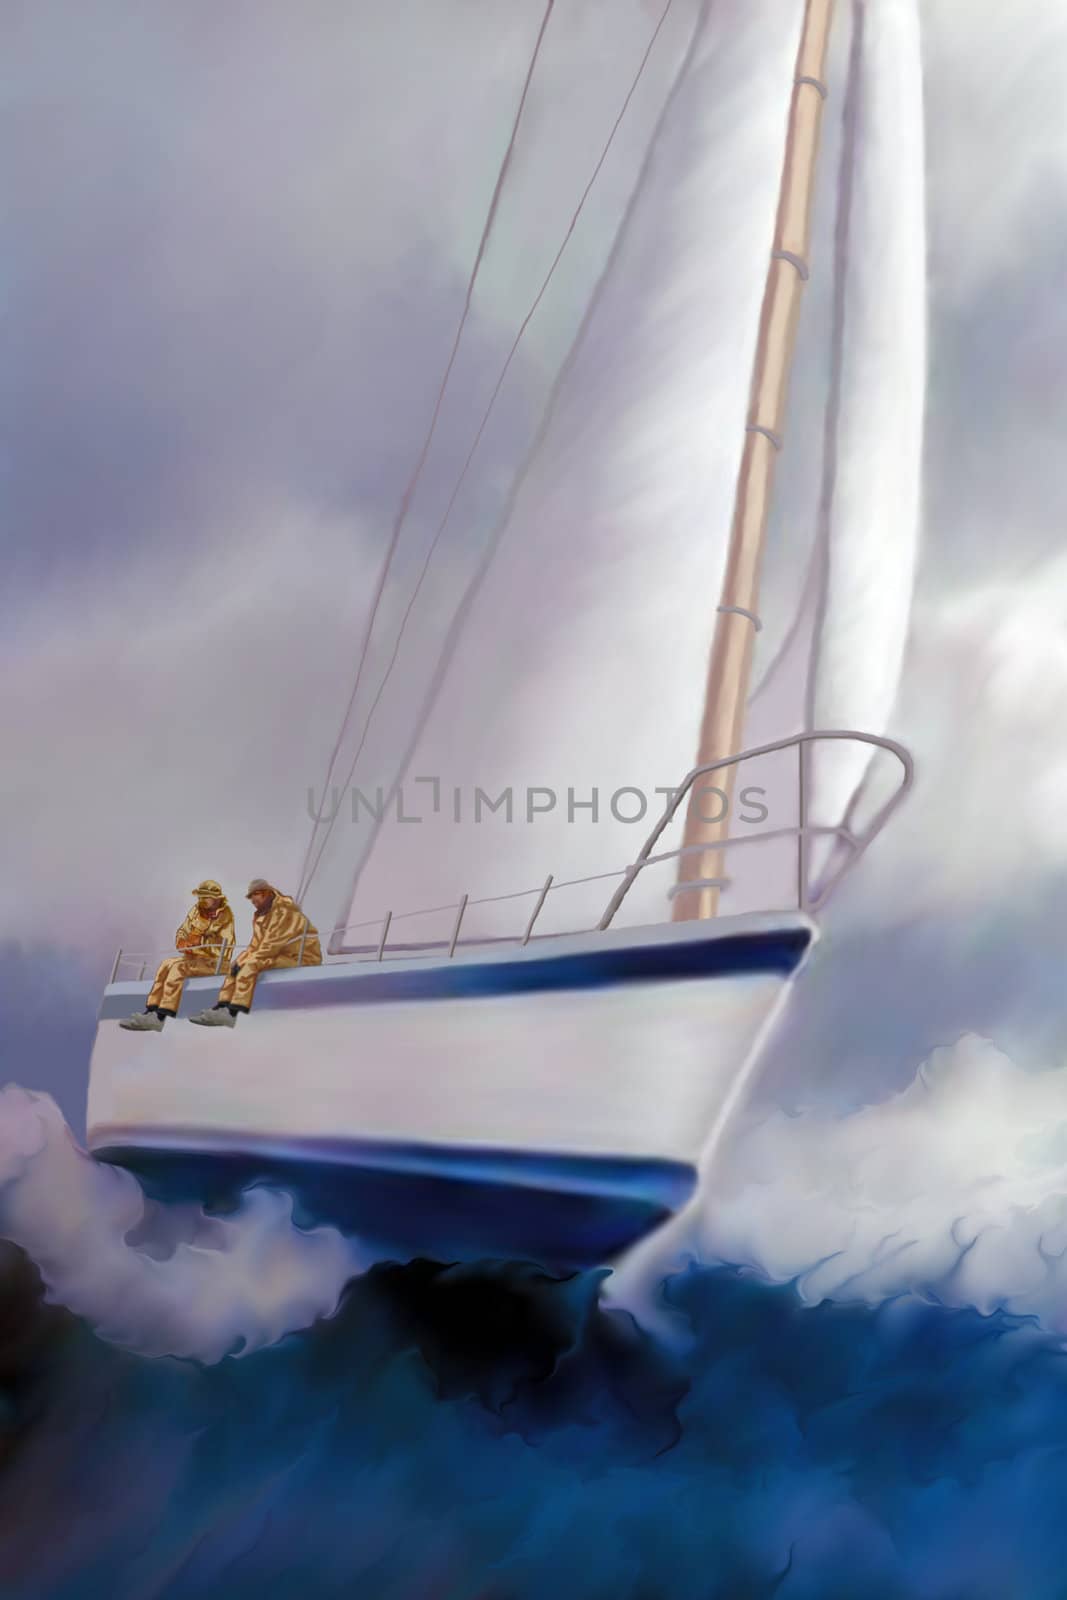 Two sailors enjoy the excitement of rough seas and the ride of a sailboat heeling over.